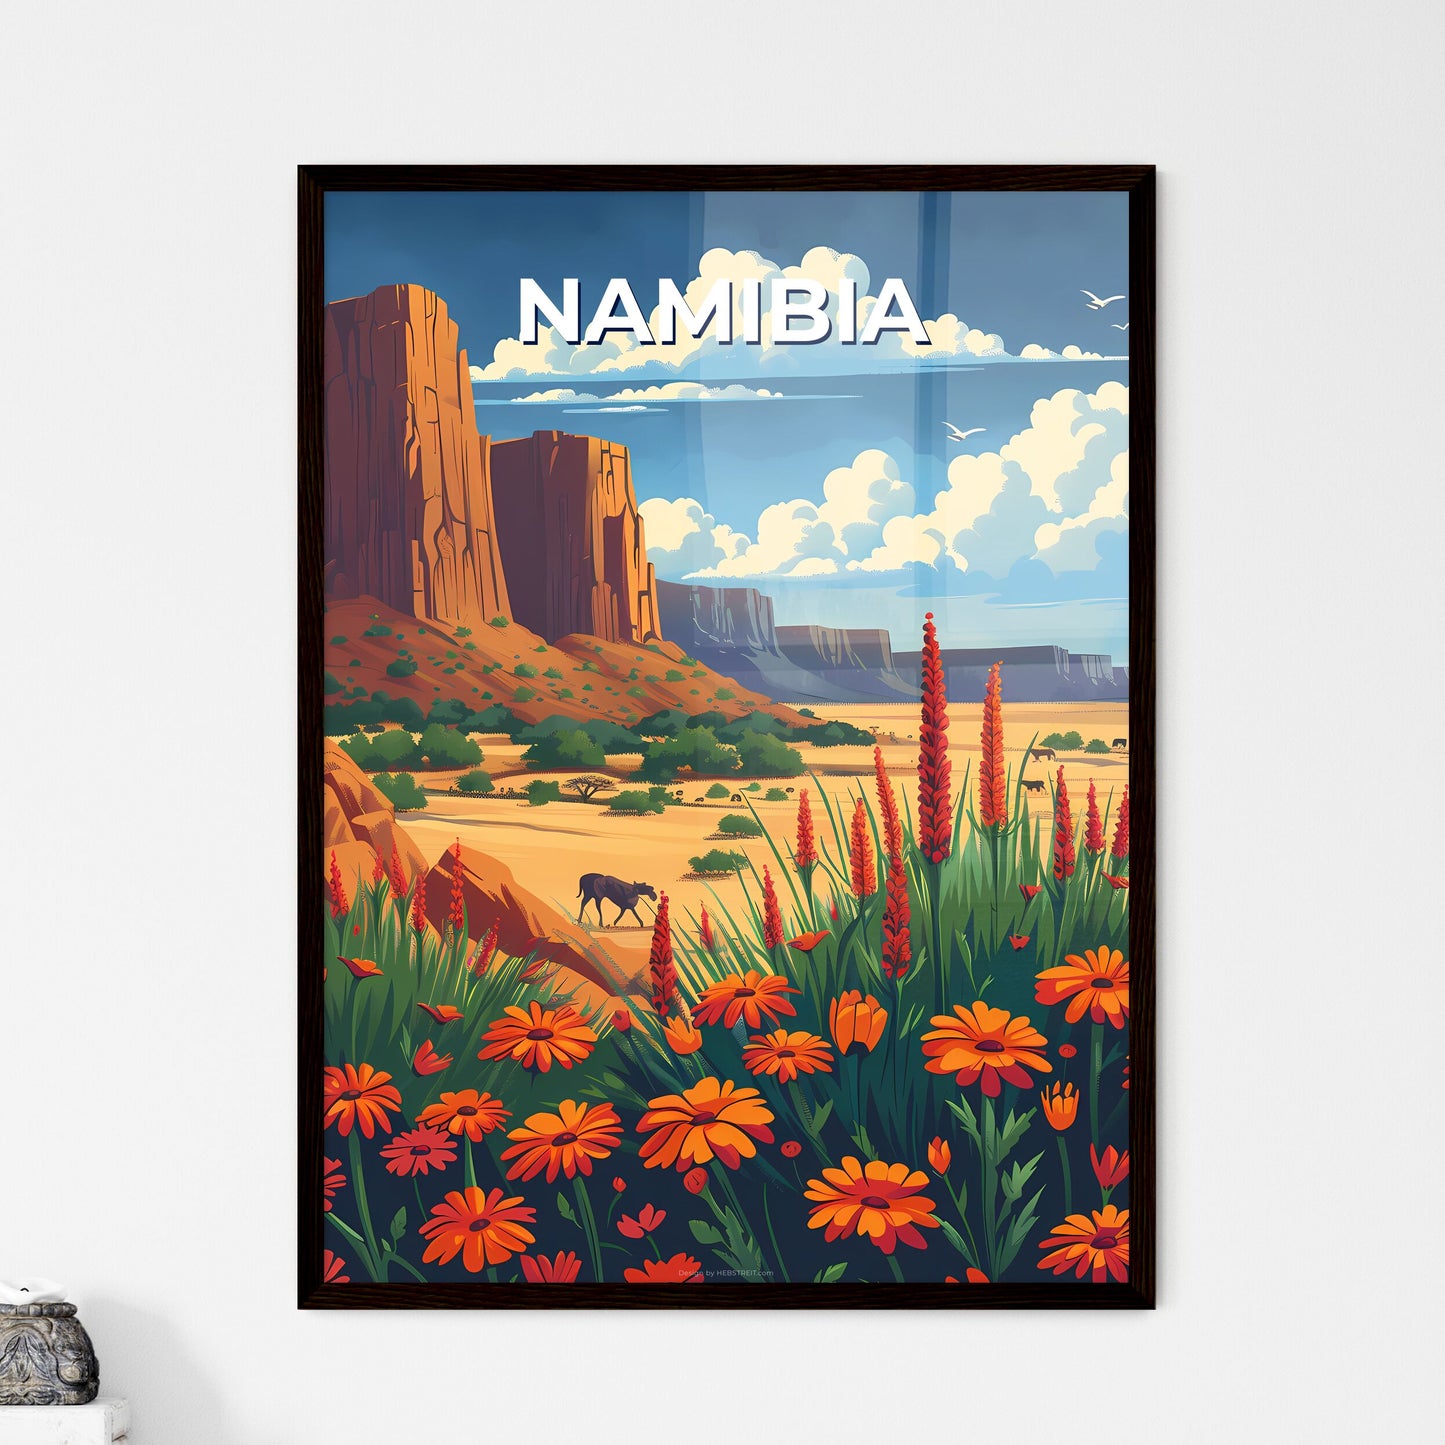 Vibrant Namibian Desert Landscape Painting with Orange Blooms and Mountain Scenery